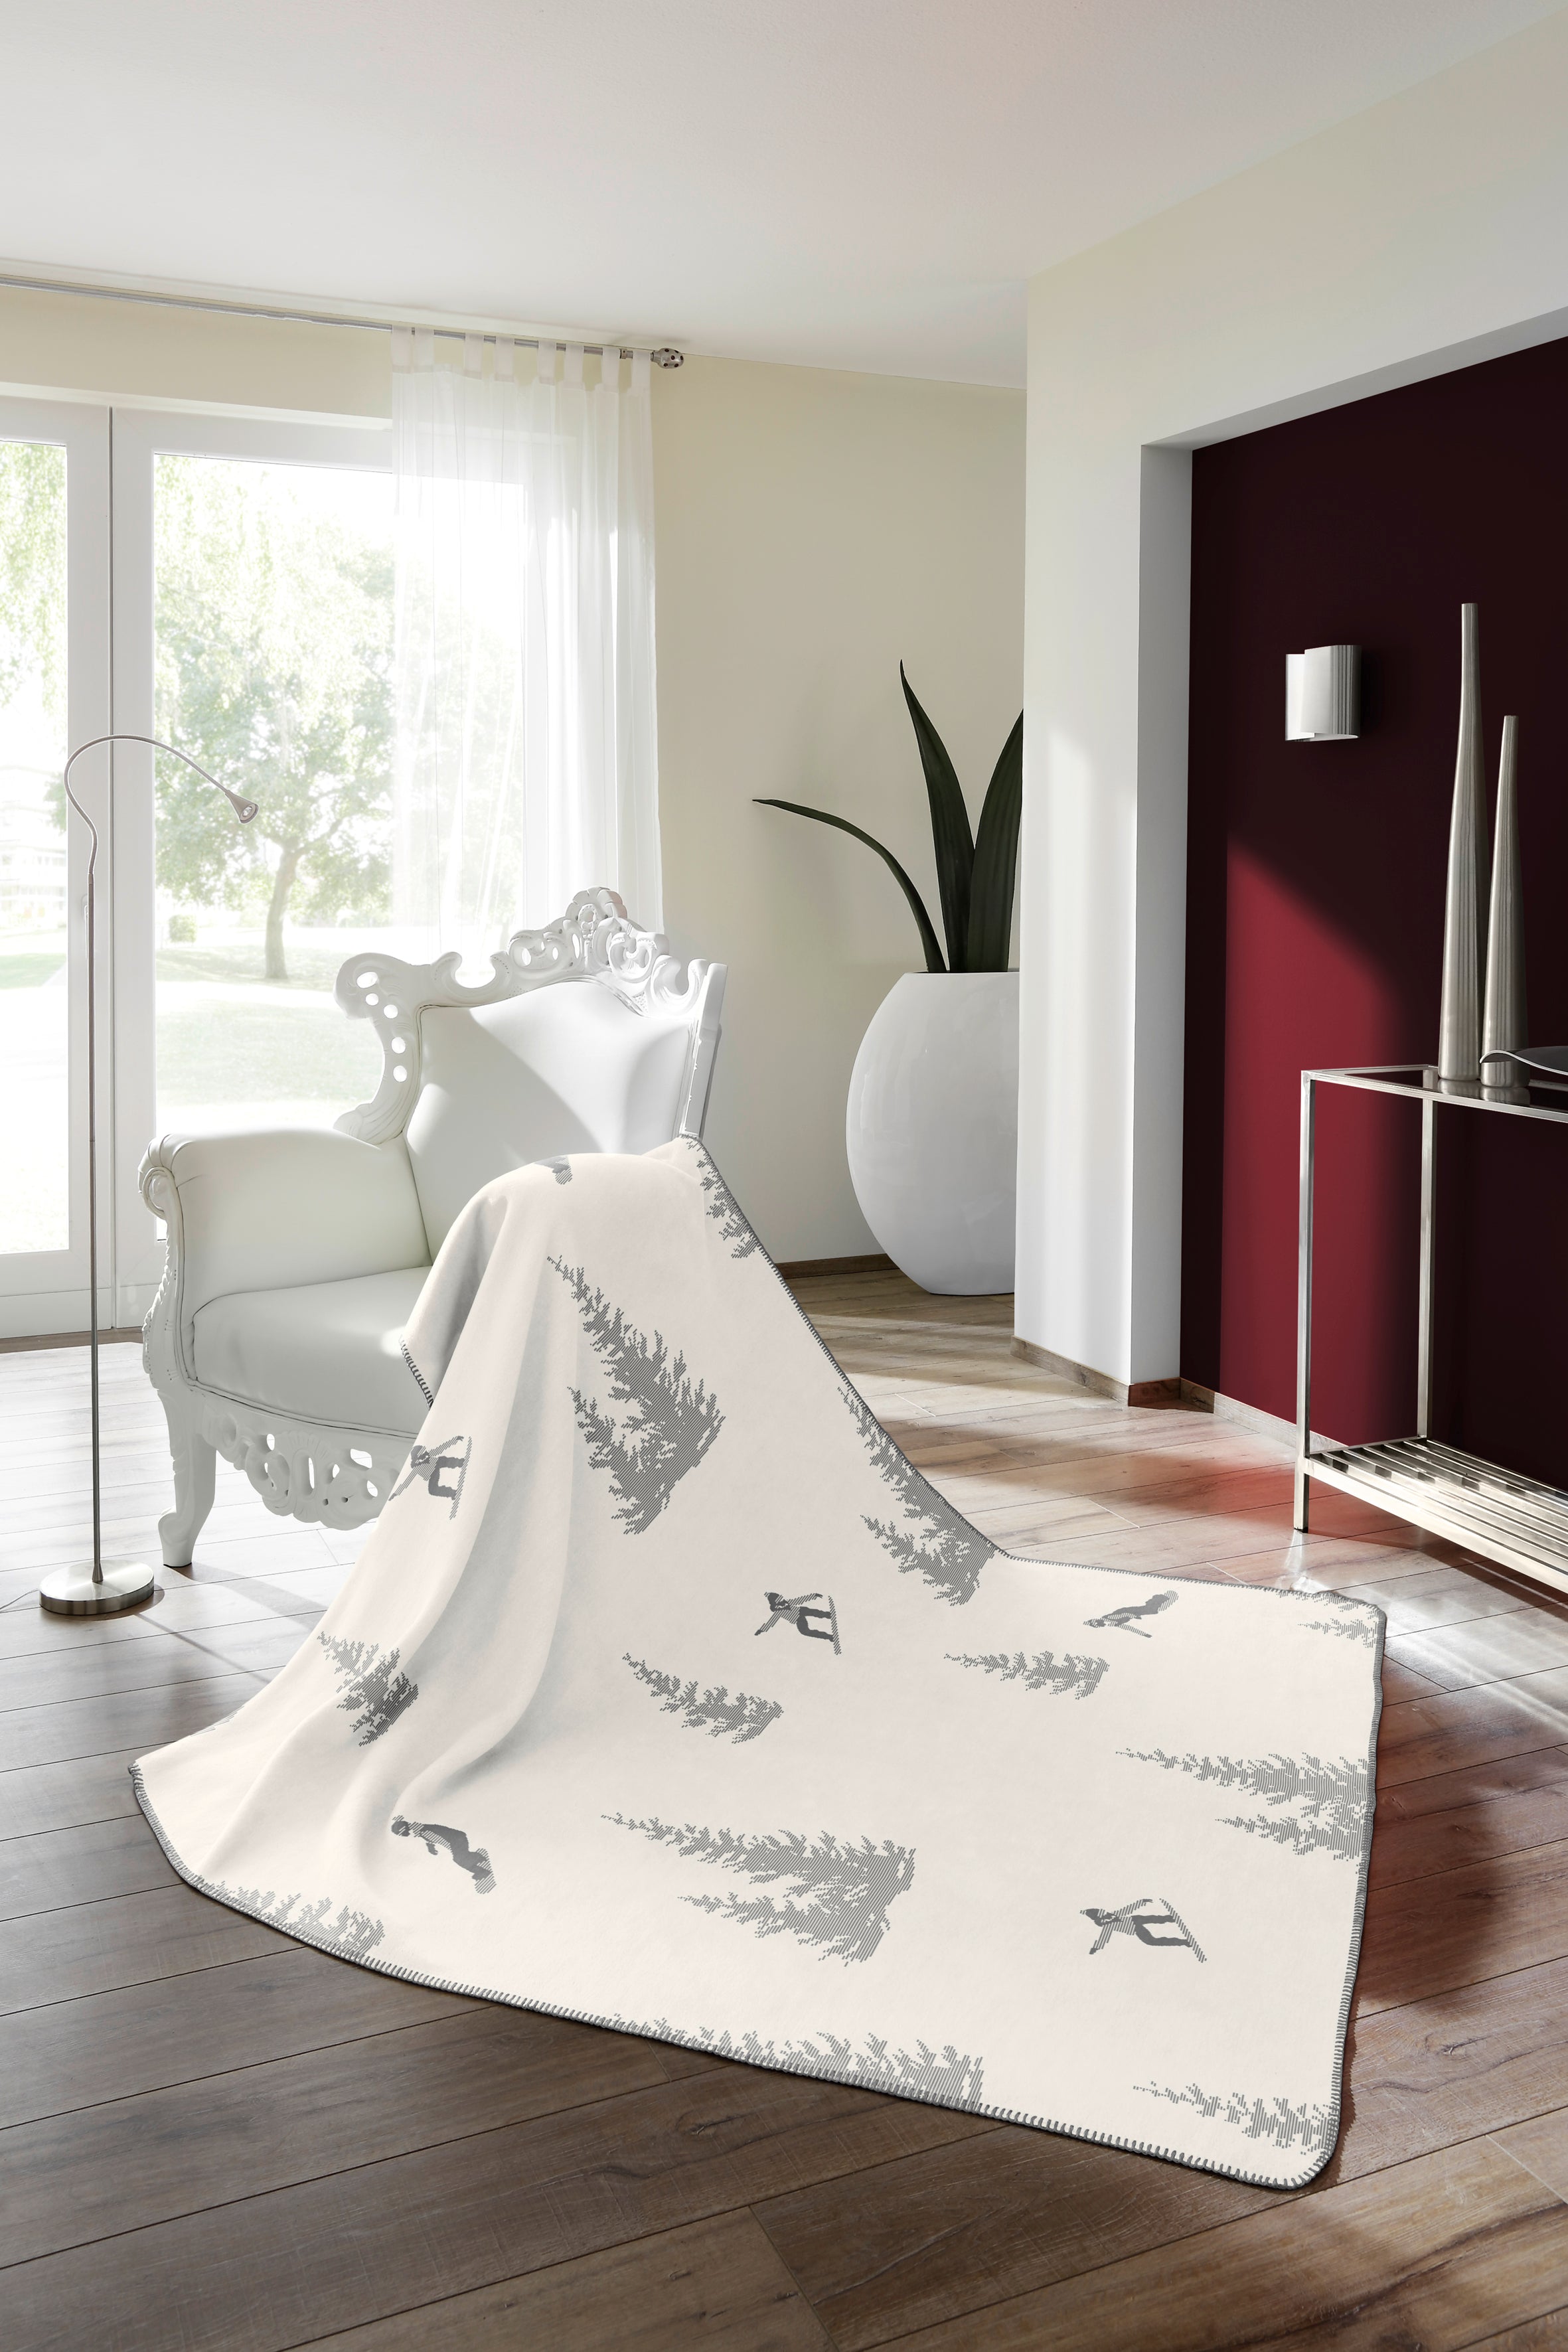 Snowboarding blanket - white side with grey snowboarders & trees shown draped across a white chair and timber floor in a lounge room.